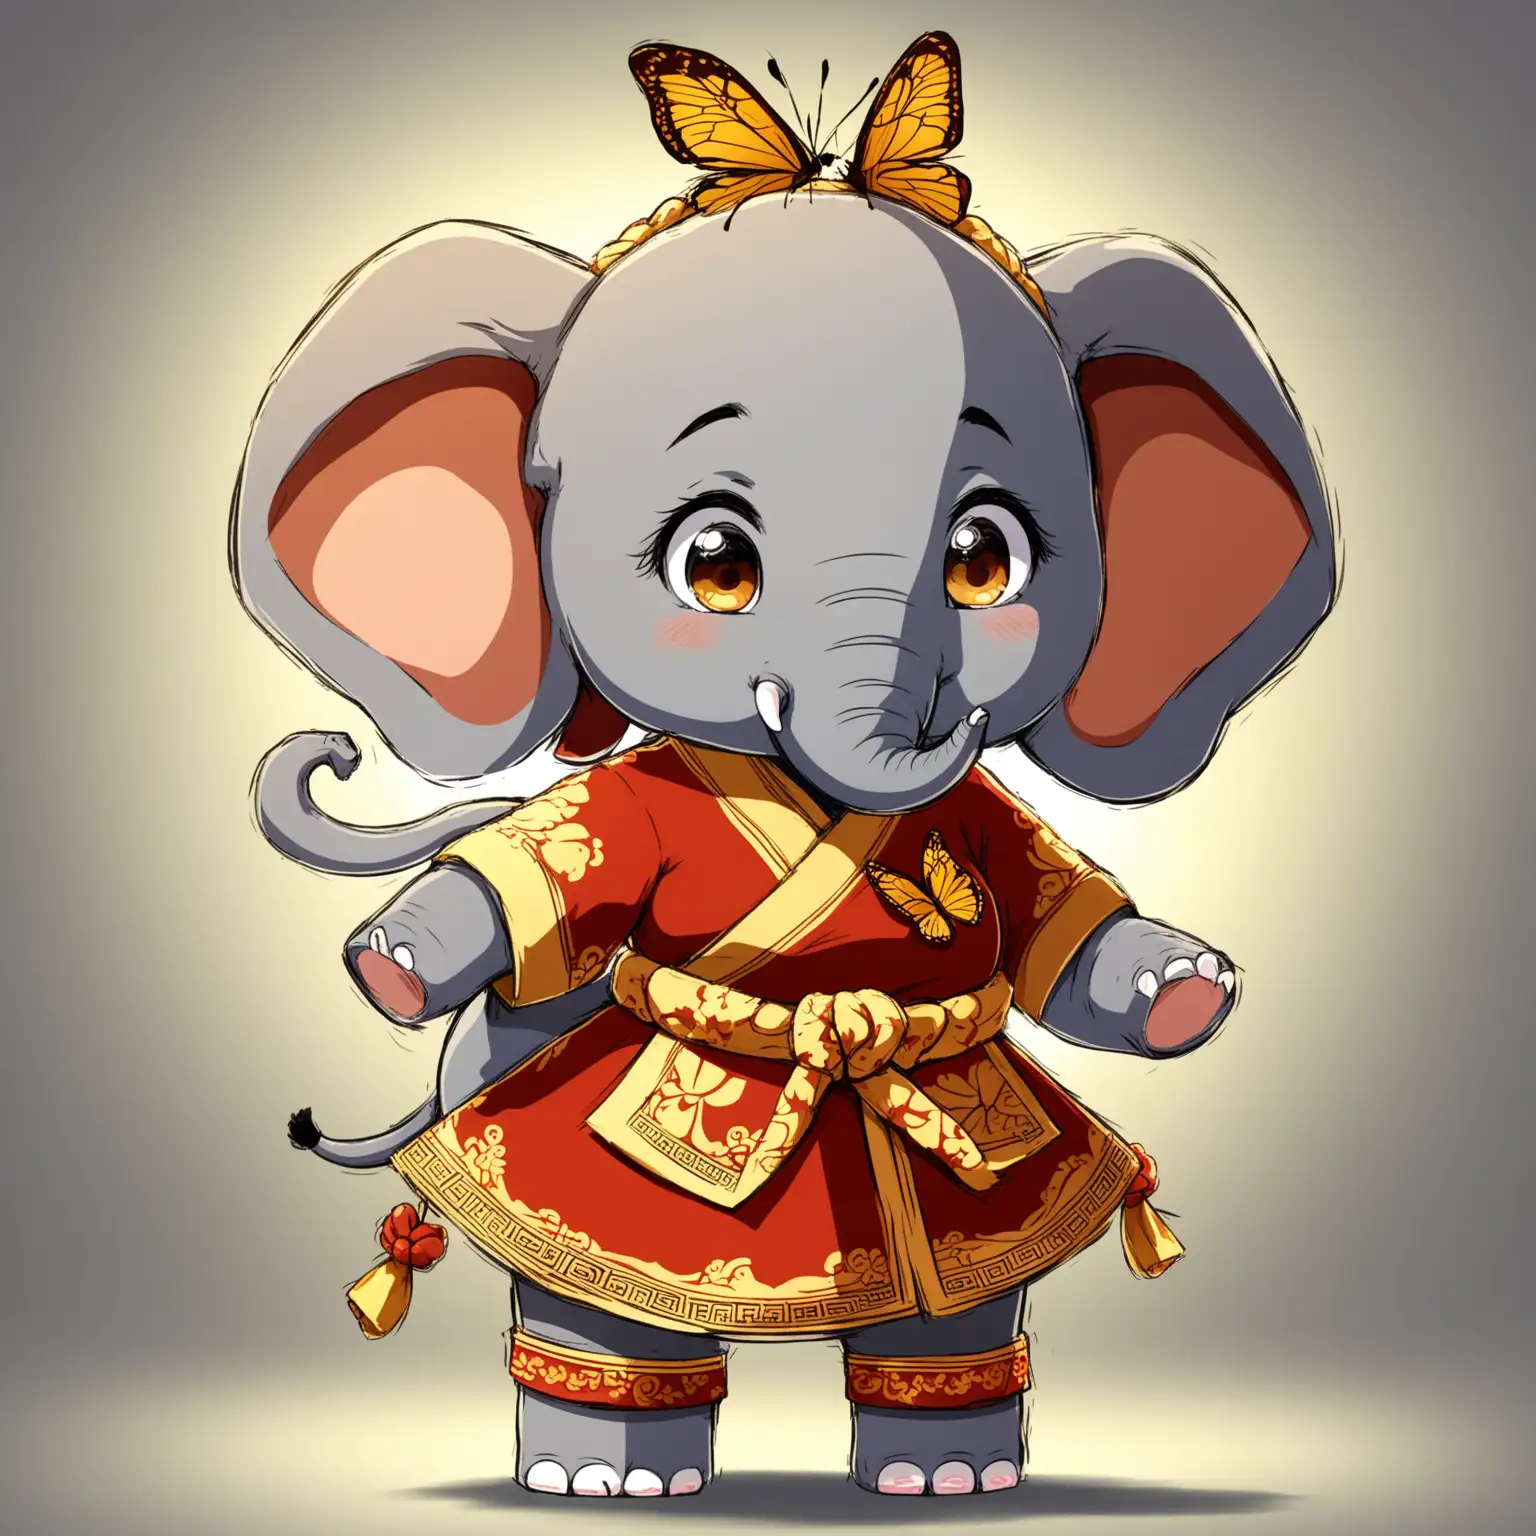 Adorable-Cartoon-Elephant-Girl-with-a-Butterfly-Knot